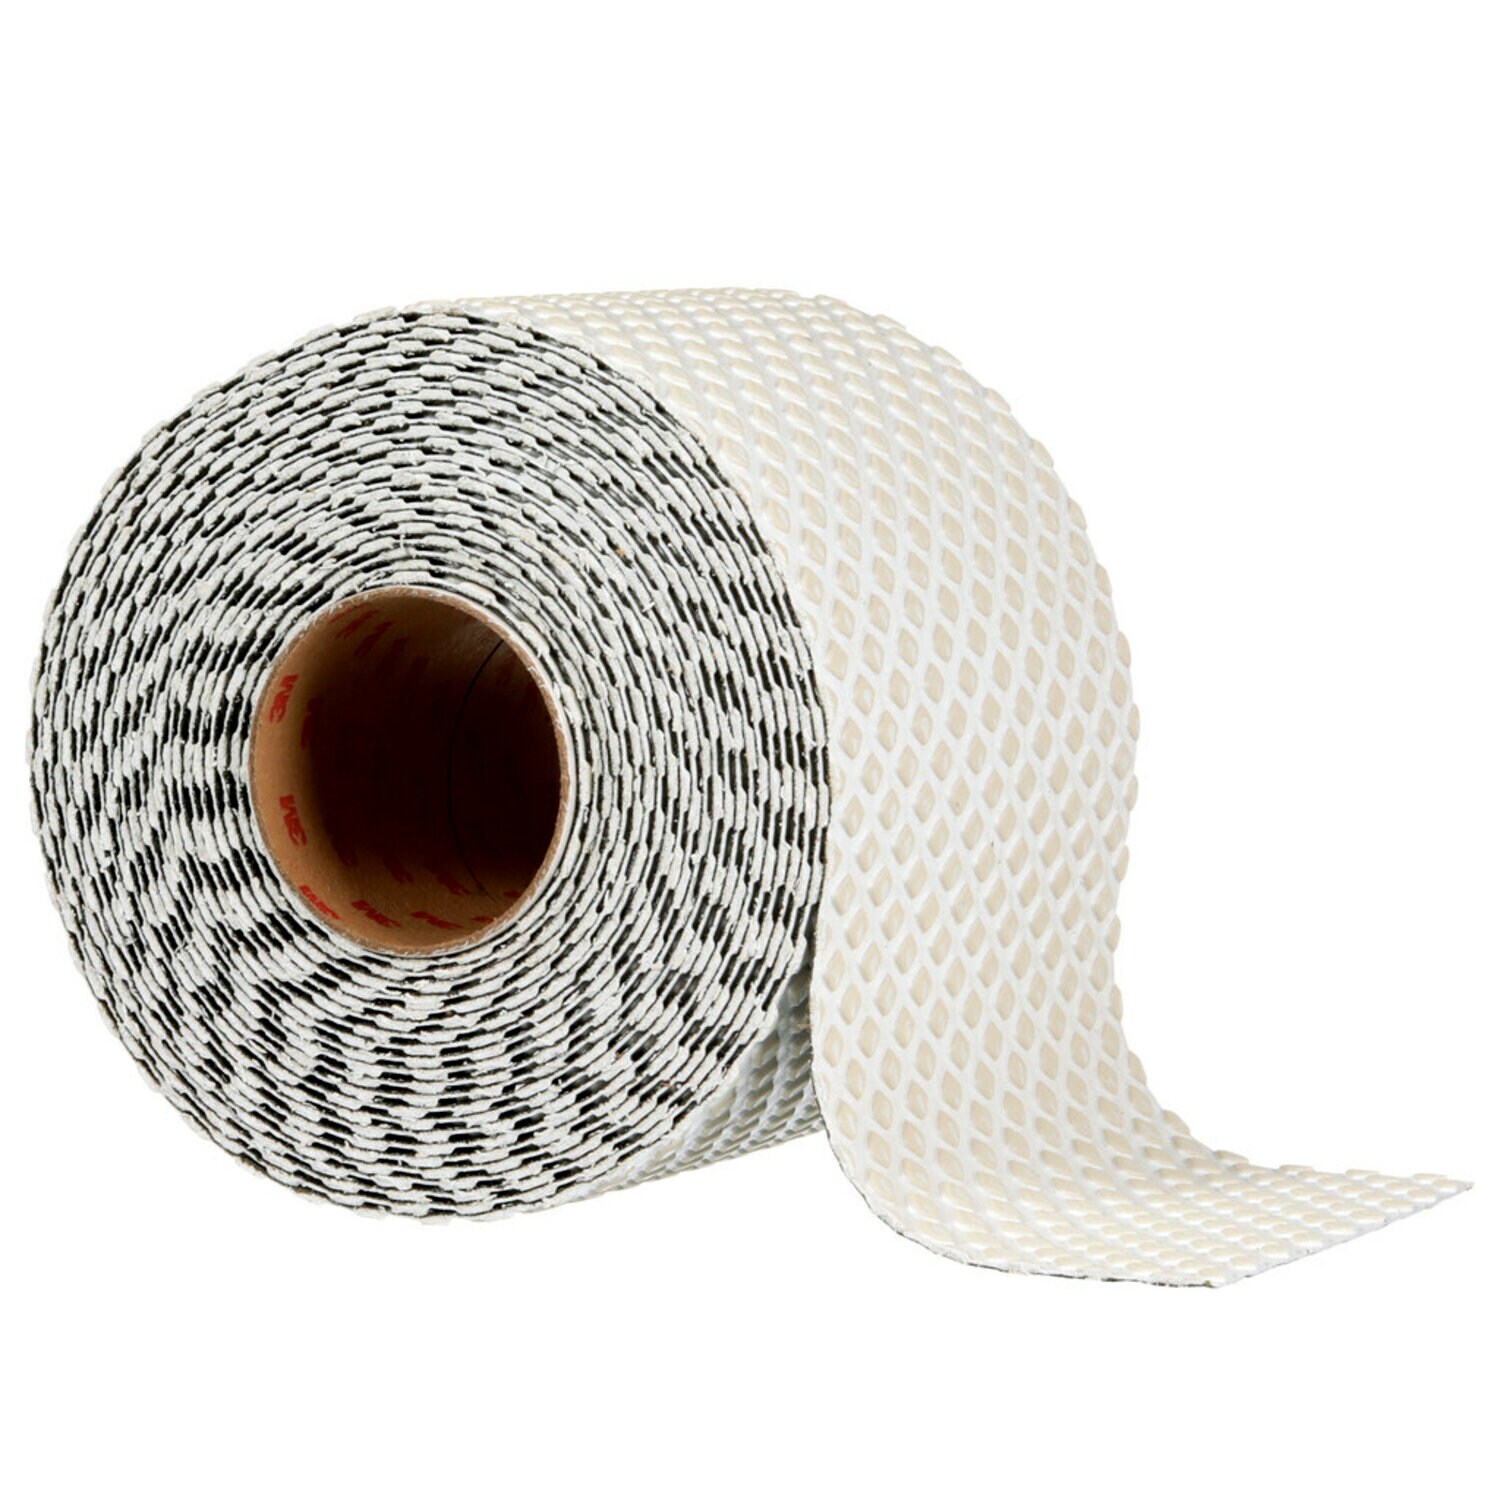 7010318009 - 3M Stamark High Performance Tape A380AW White, Net, 10 in x 25 yd